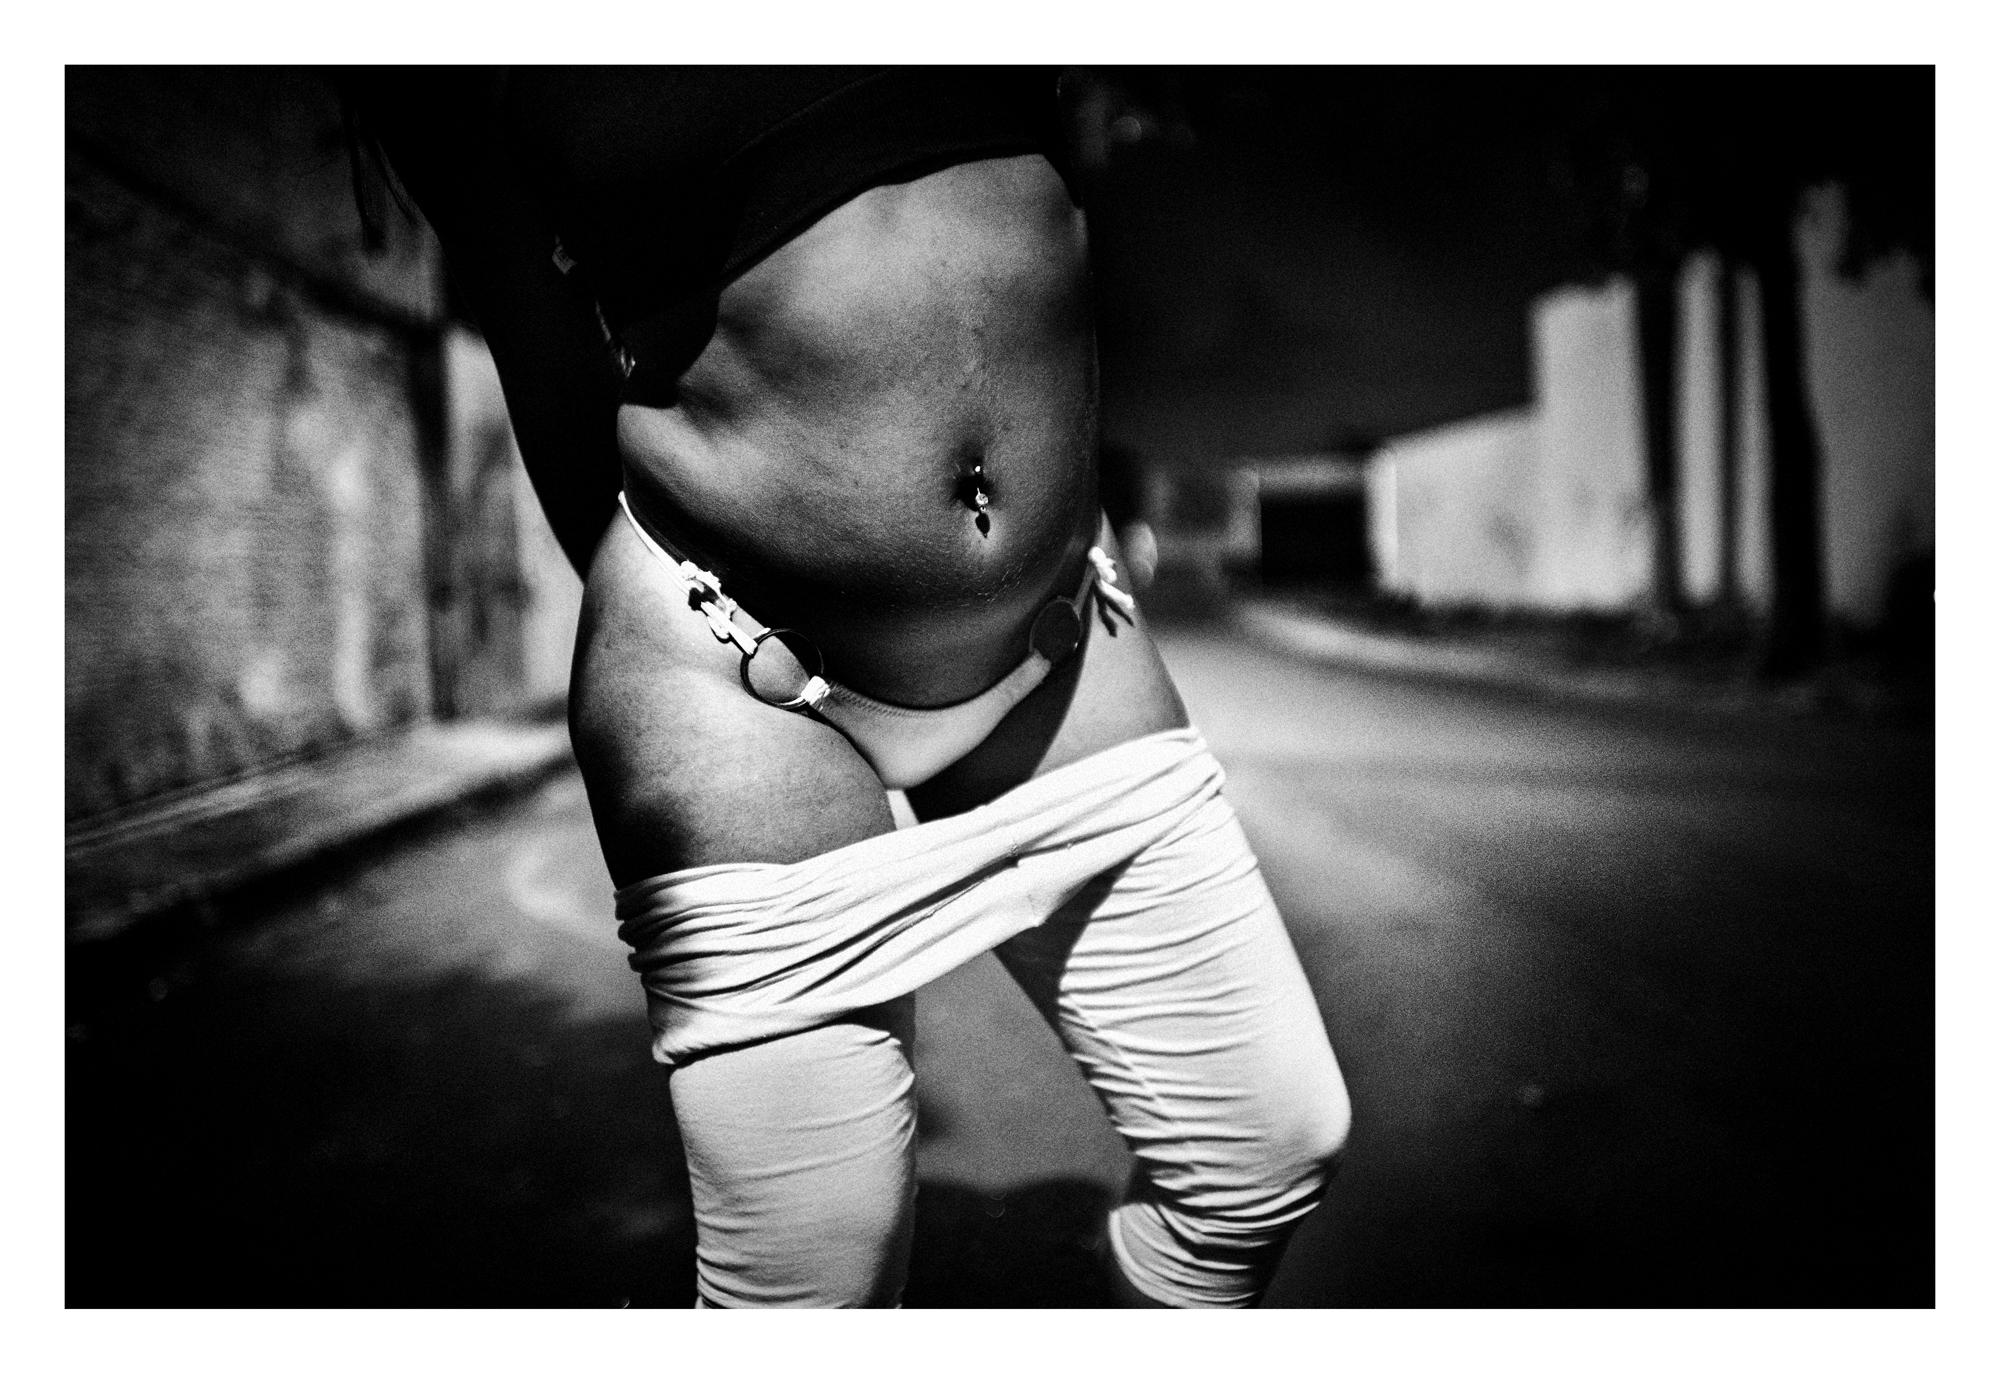 All imperfect things - Fortaleza, Brazil. April 2012. Emyle is a transsexual...